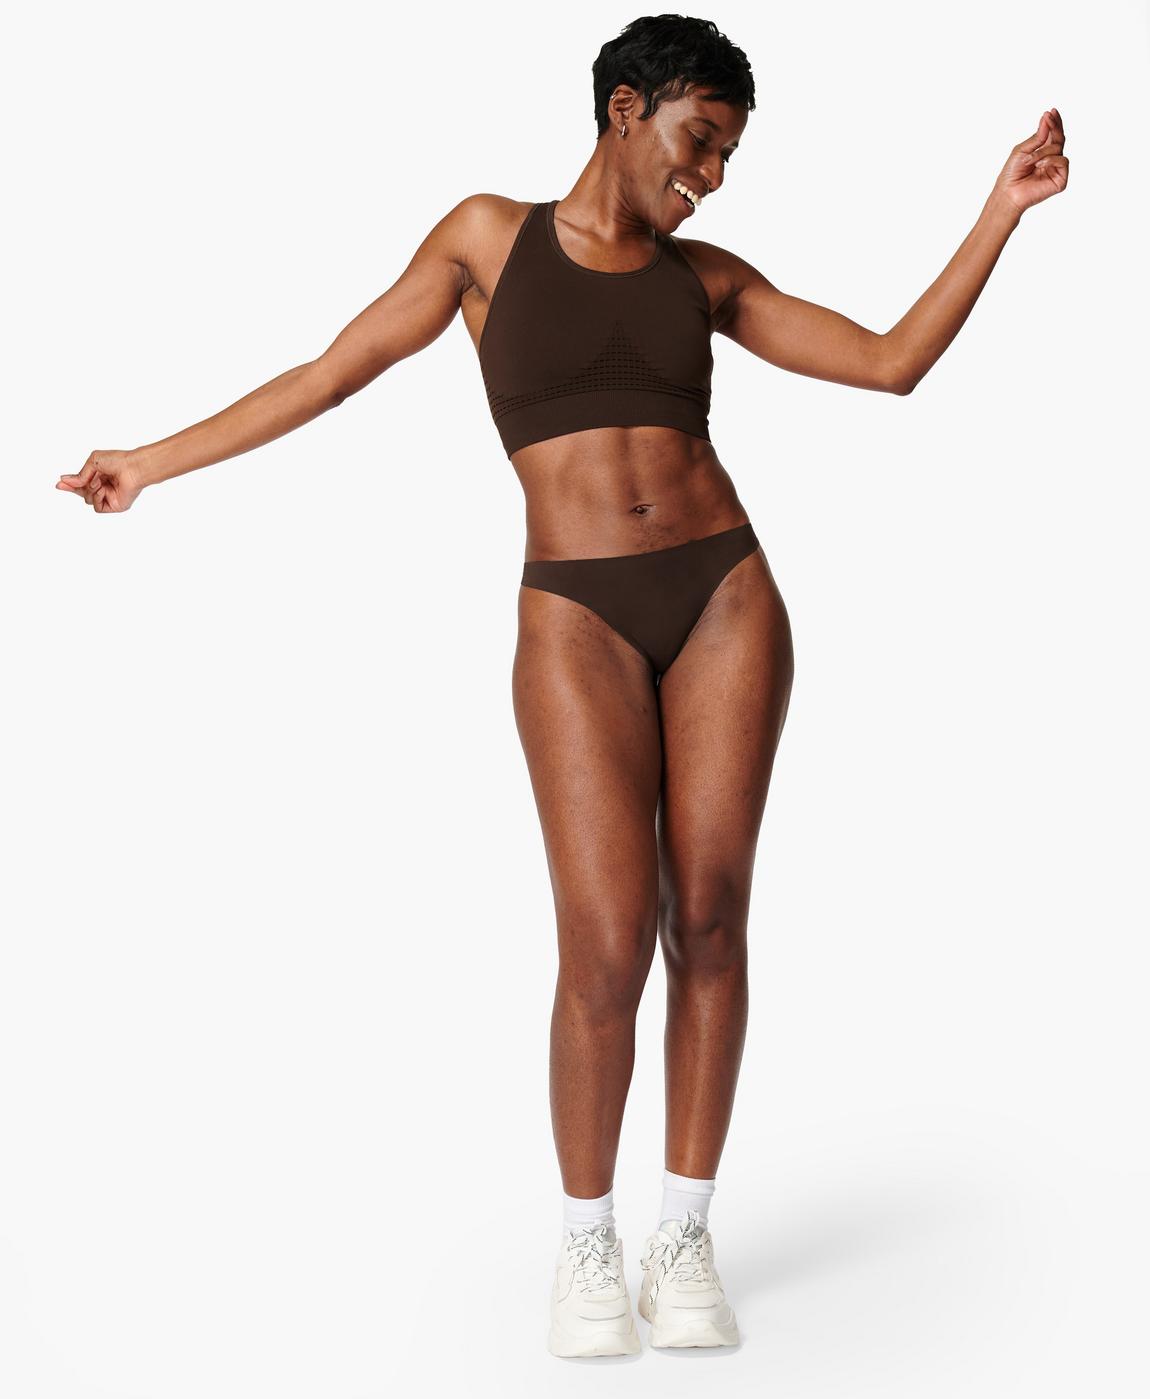 Barely There Briefs- tanbrown  Women's Sports Pants & Underwear